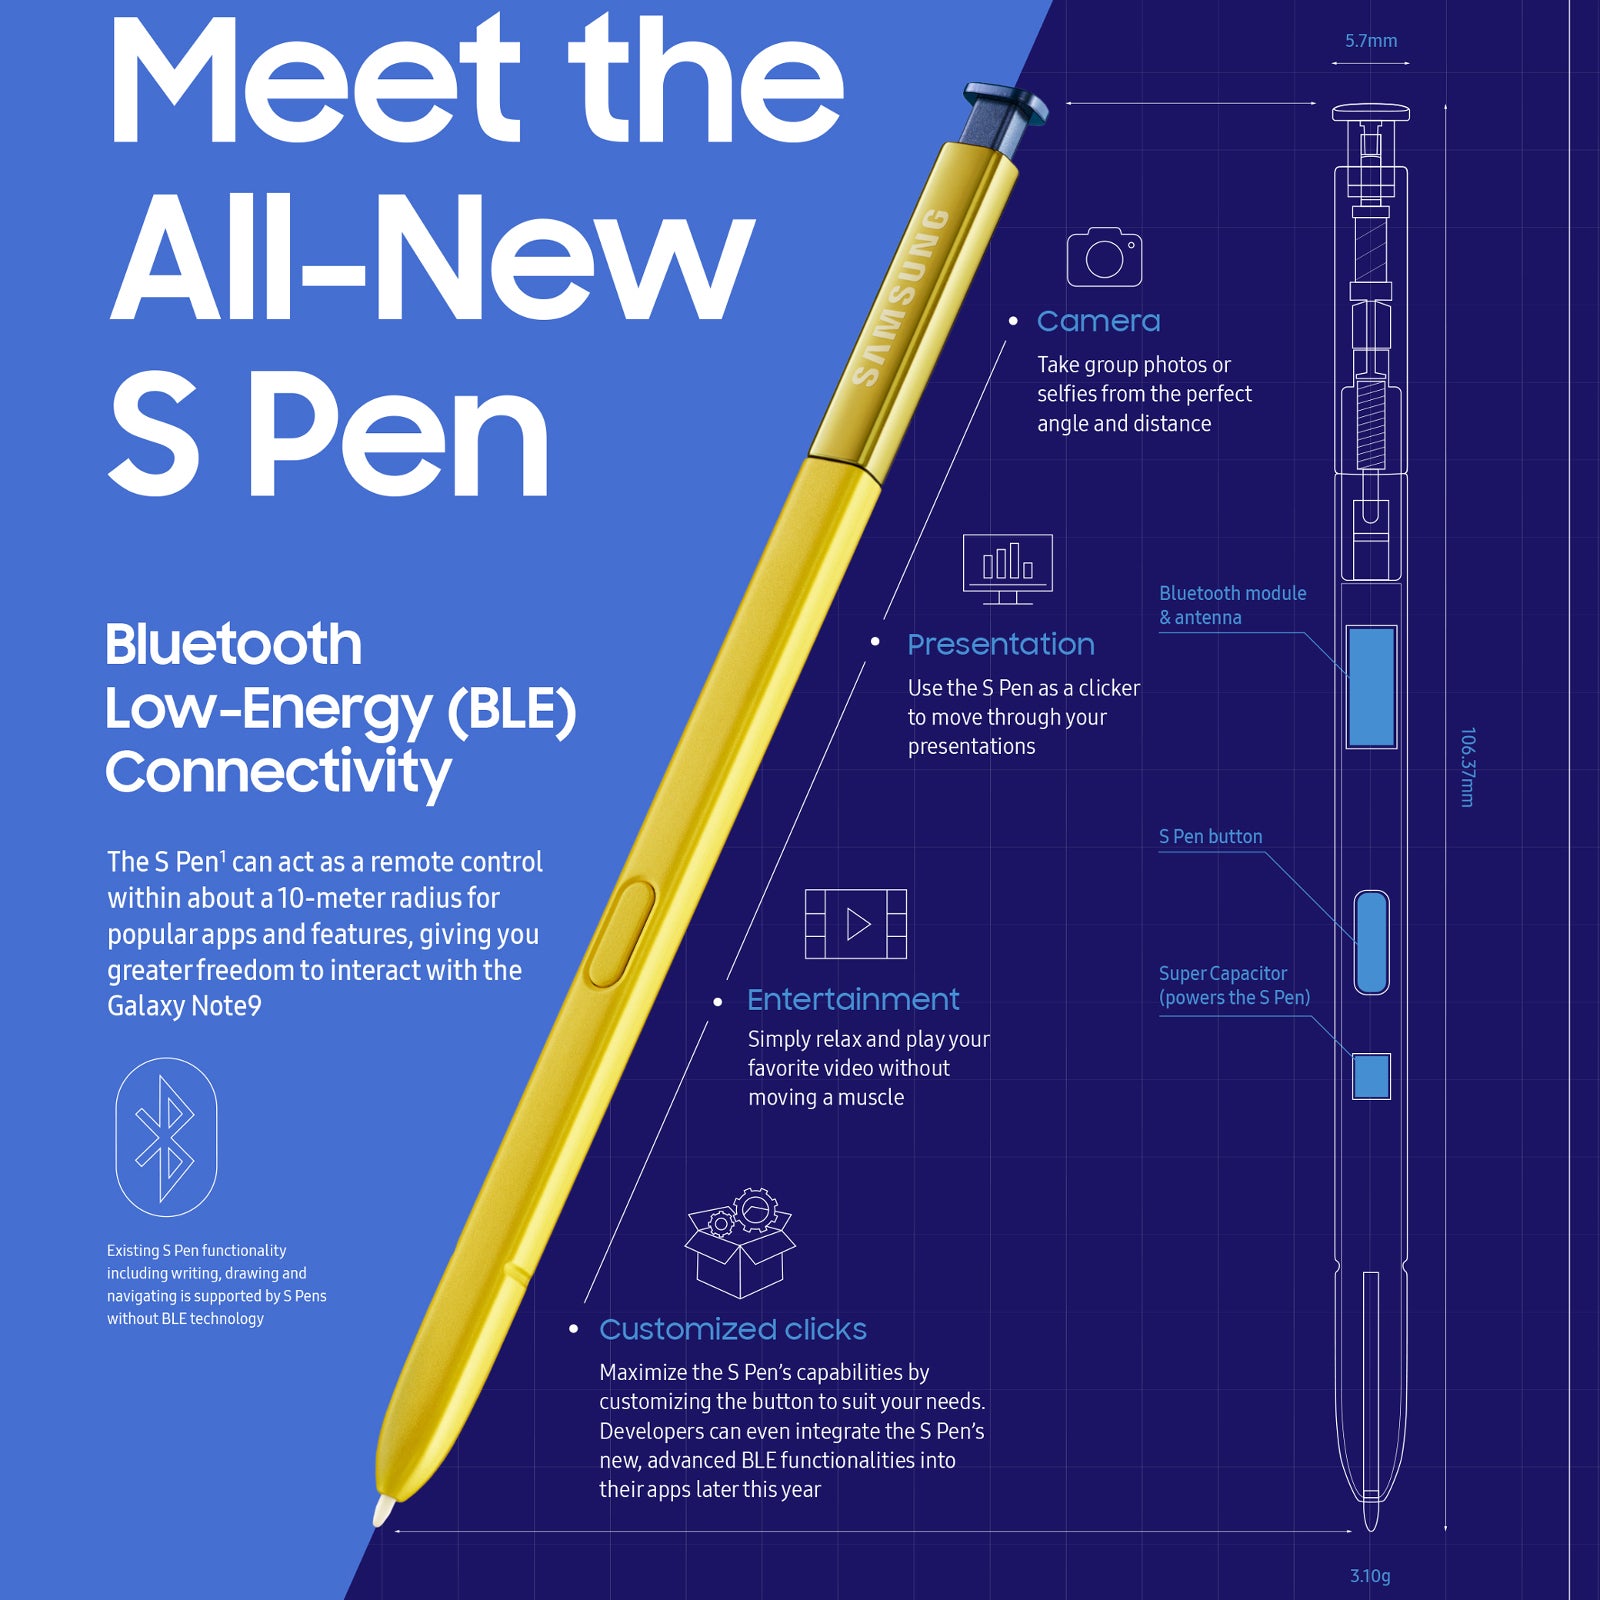 The all-new Bluetooth-connected S Pen: the new features of the Note 9's stylus!